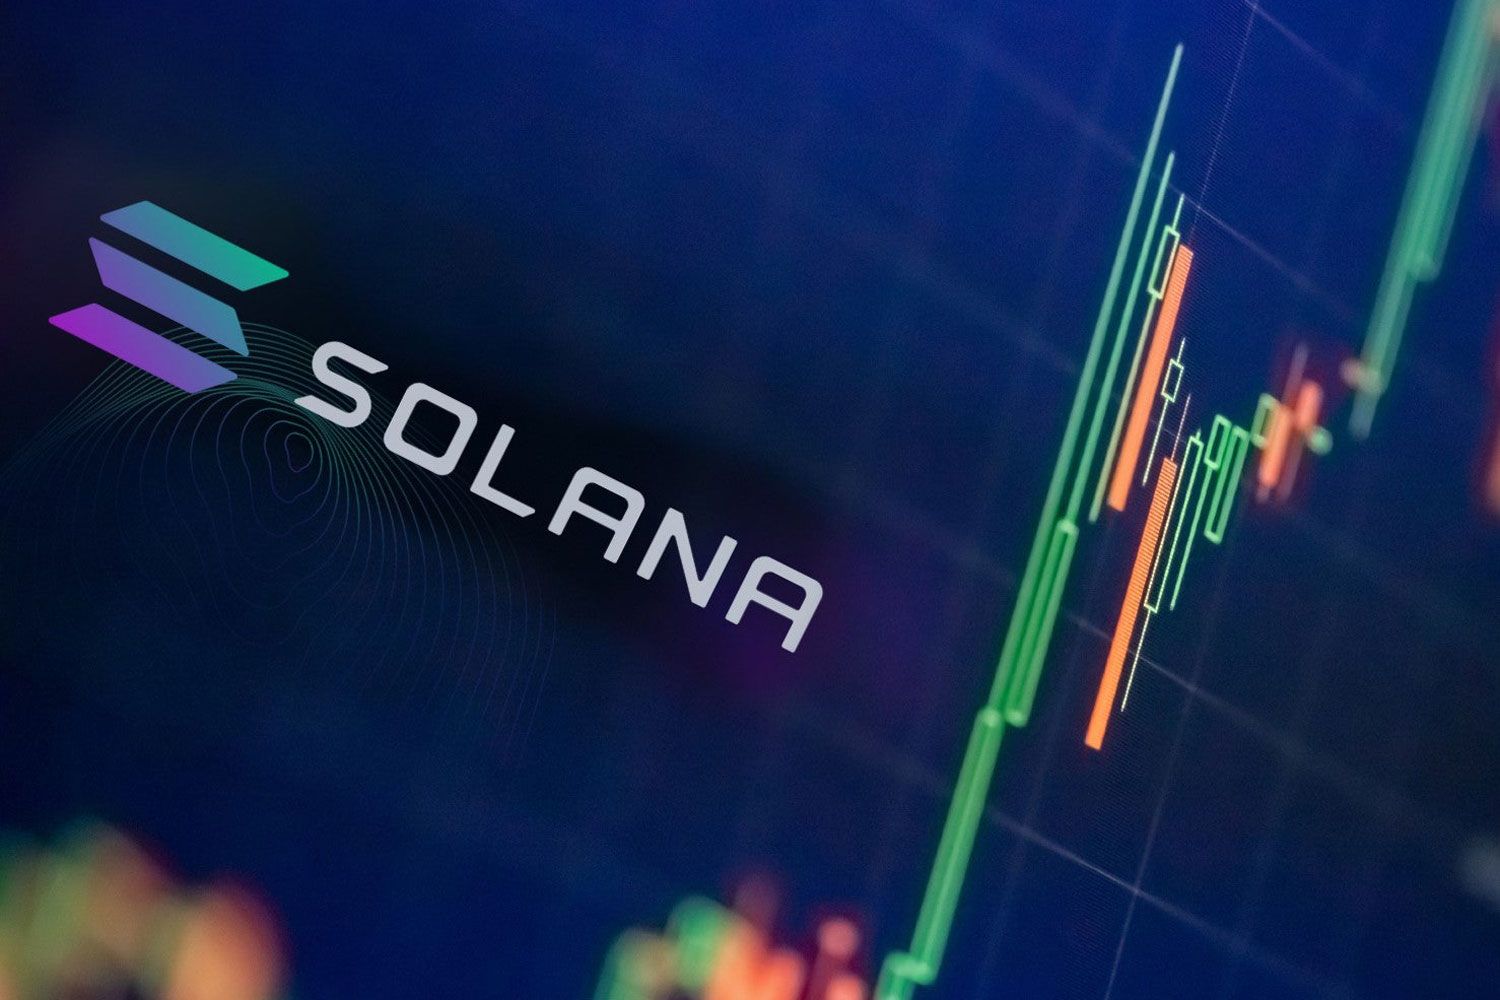 Someone Just Bought $1.6 Million SOL on Binance